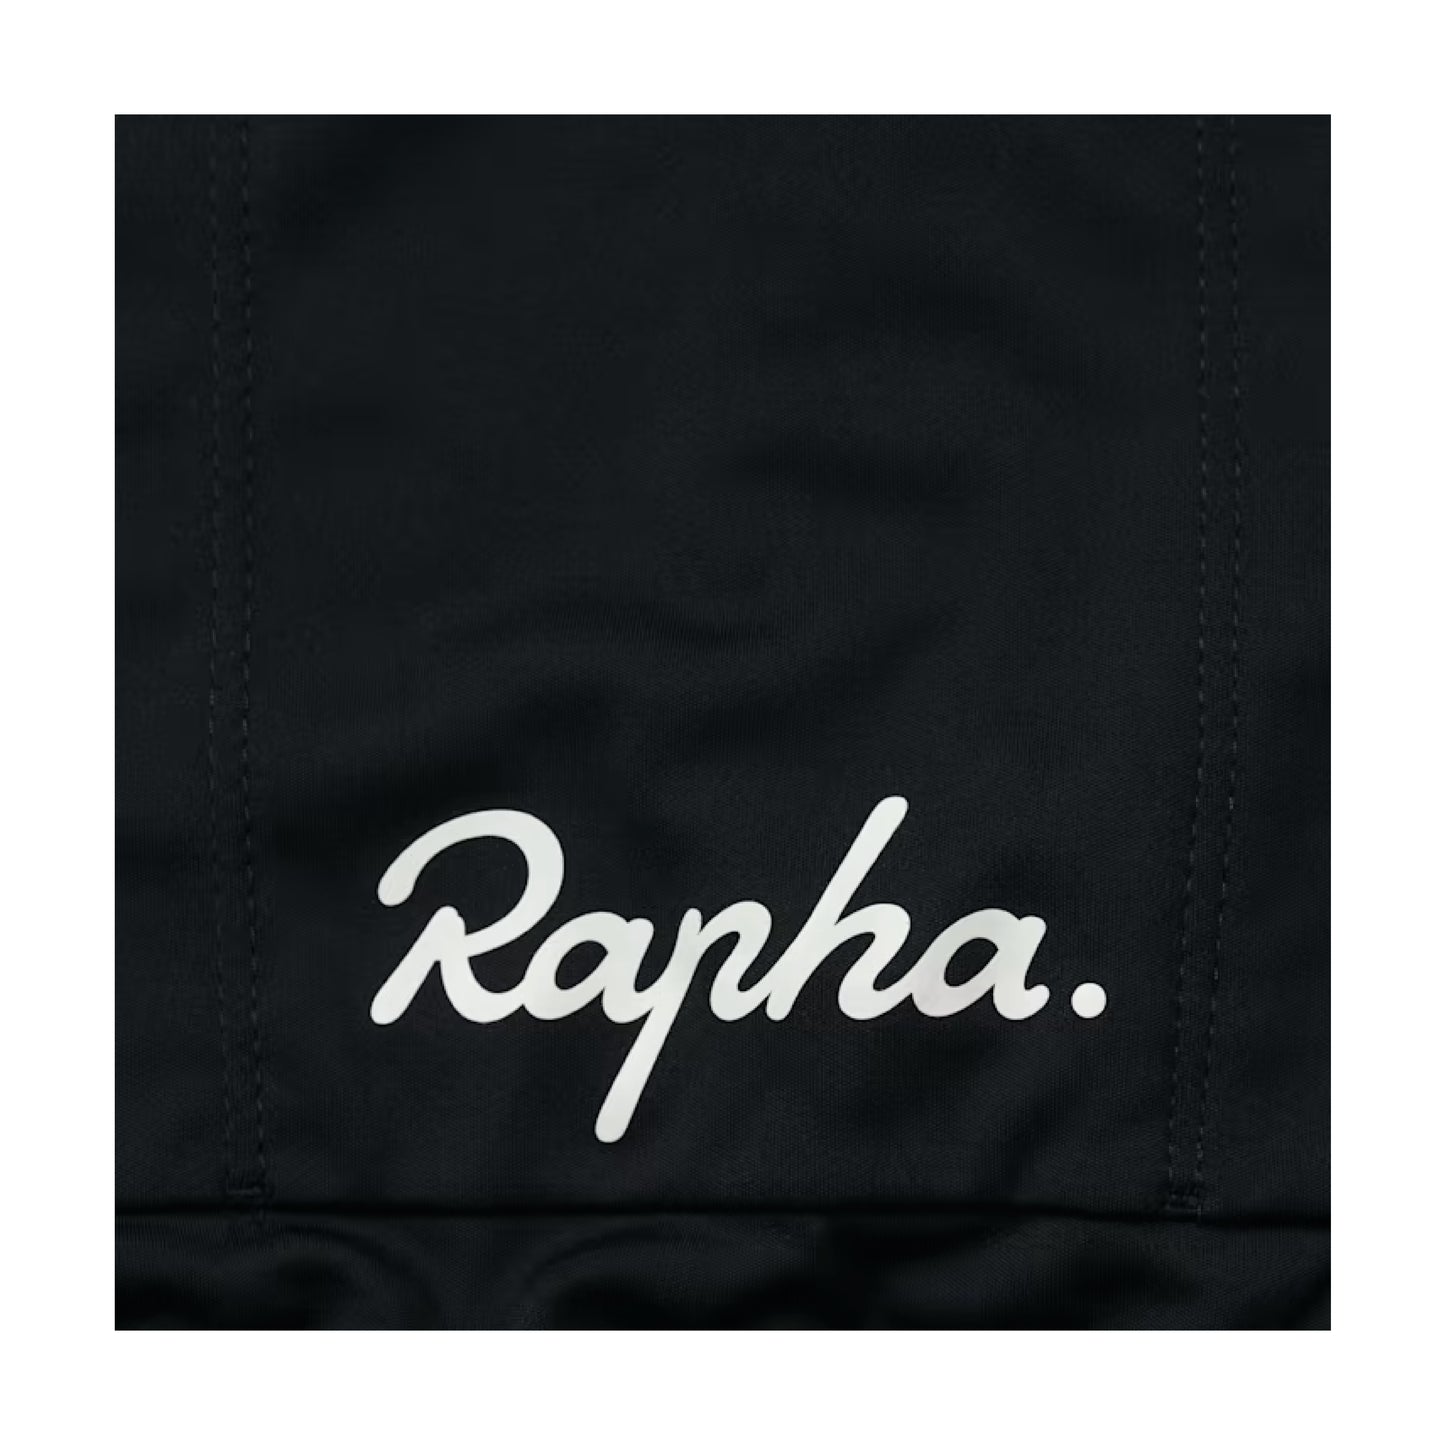 RAPHA Core Lightweight Jersey Maillot Ciclismo - BLK Black